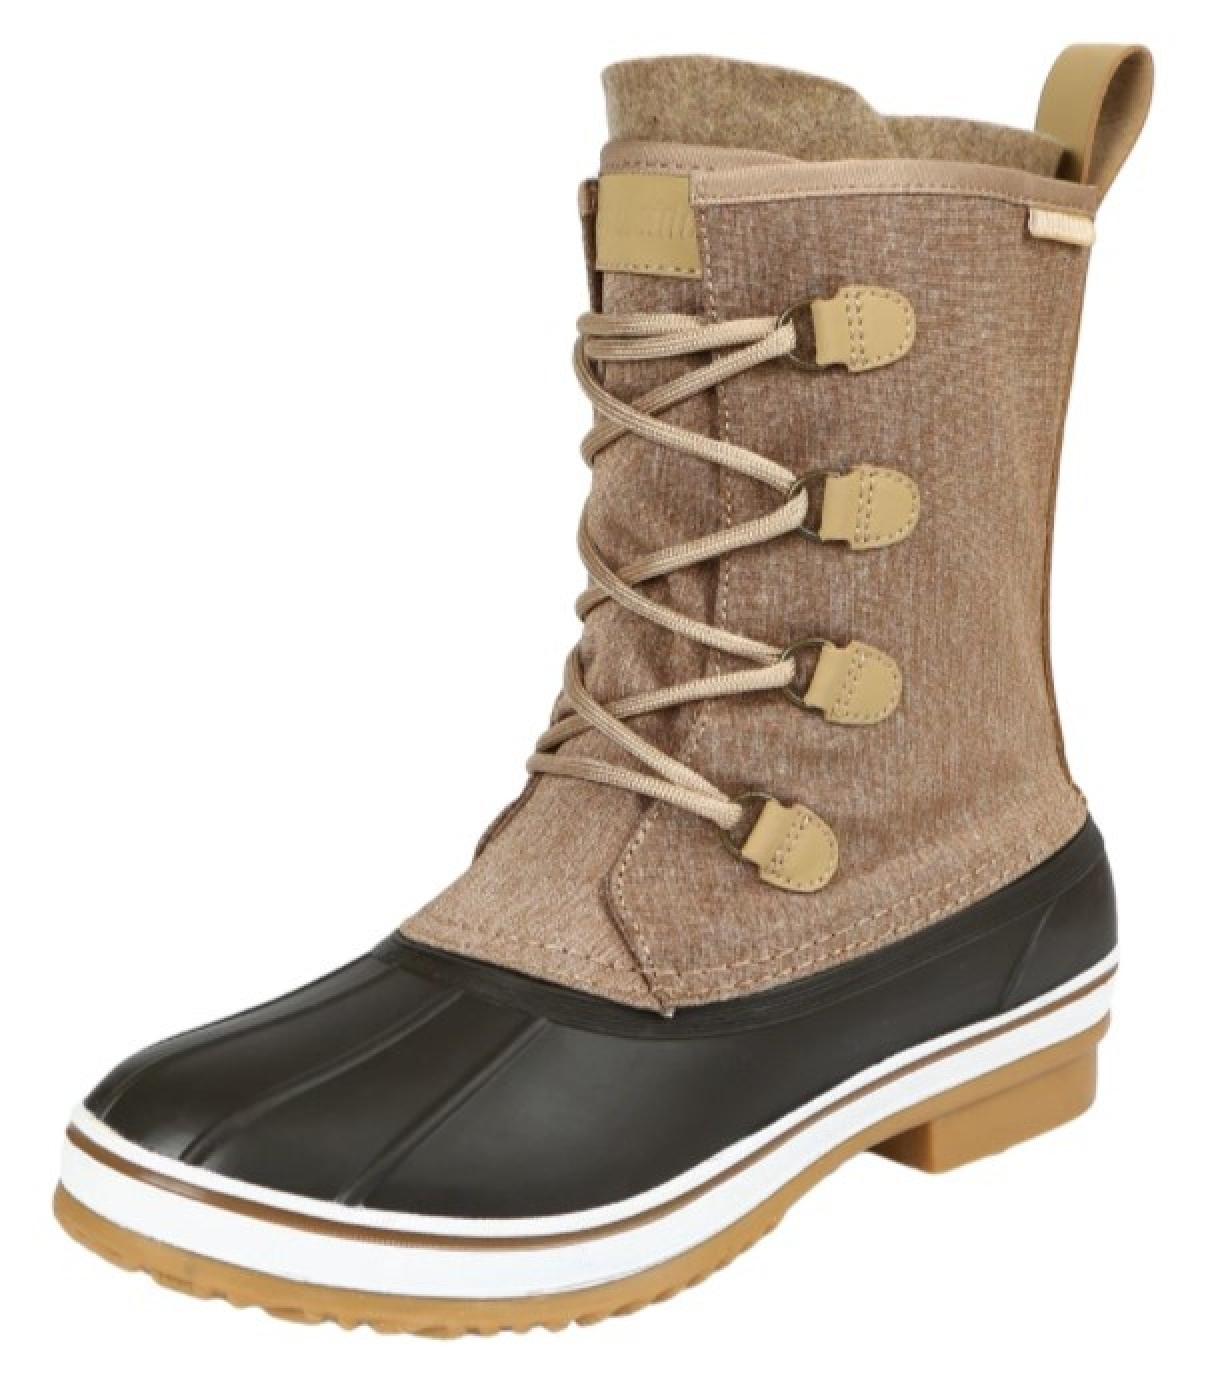 Northside Women's Bradshaw Waterproof Insulated Winter Snow Boot Angled Profile View